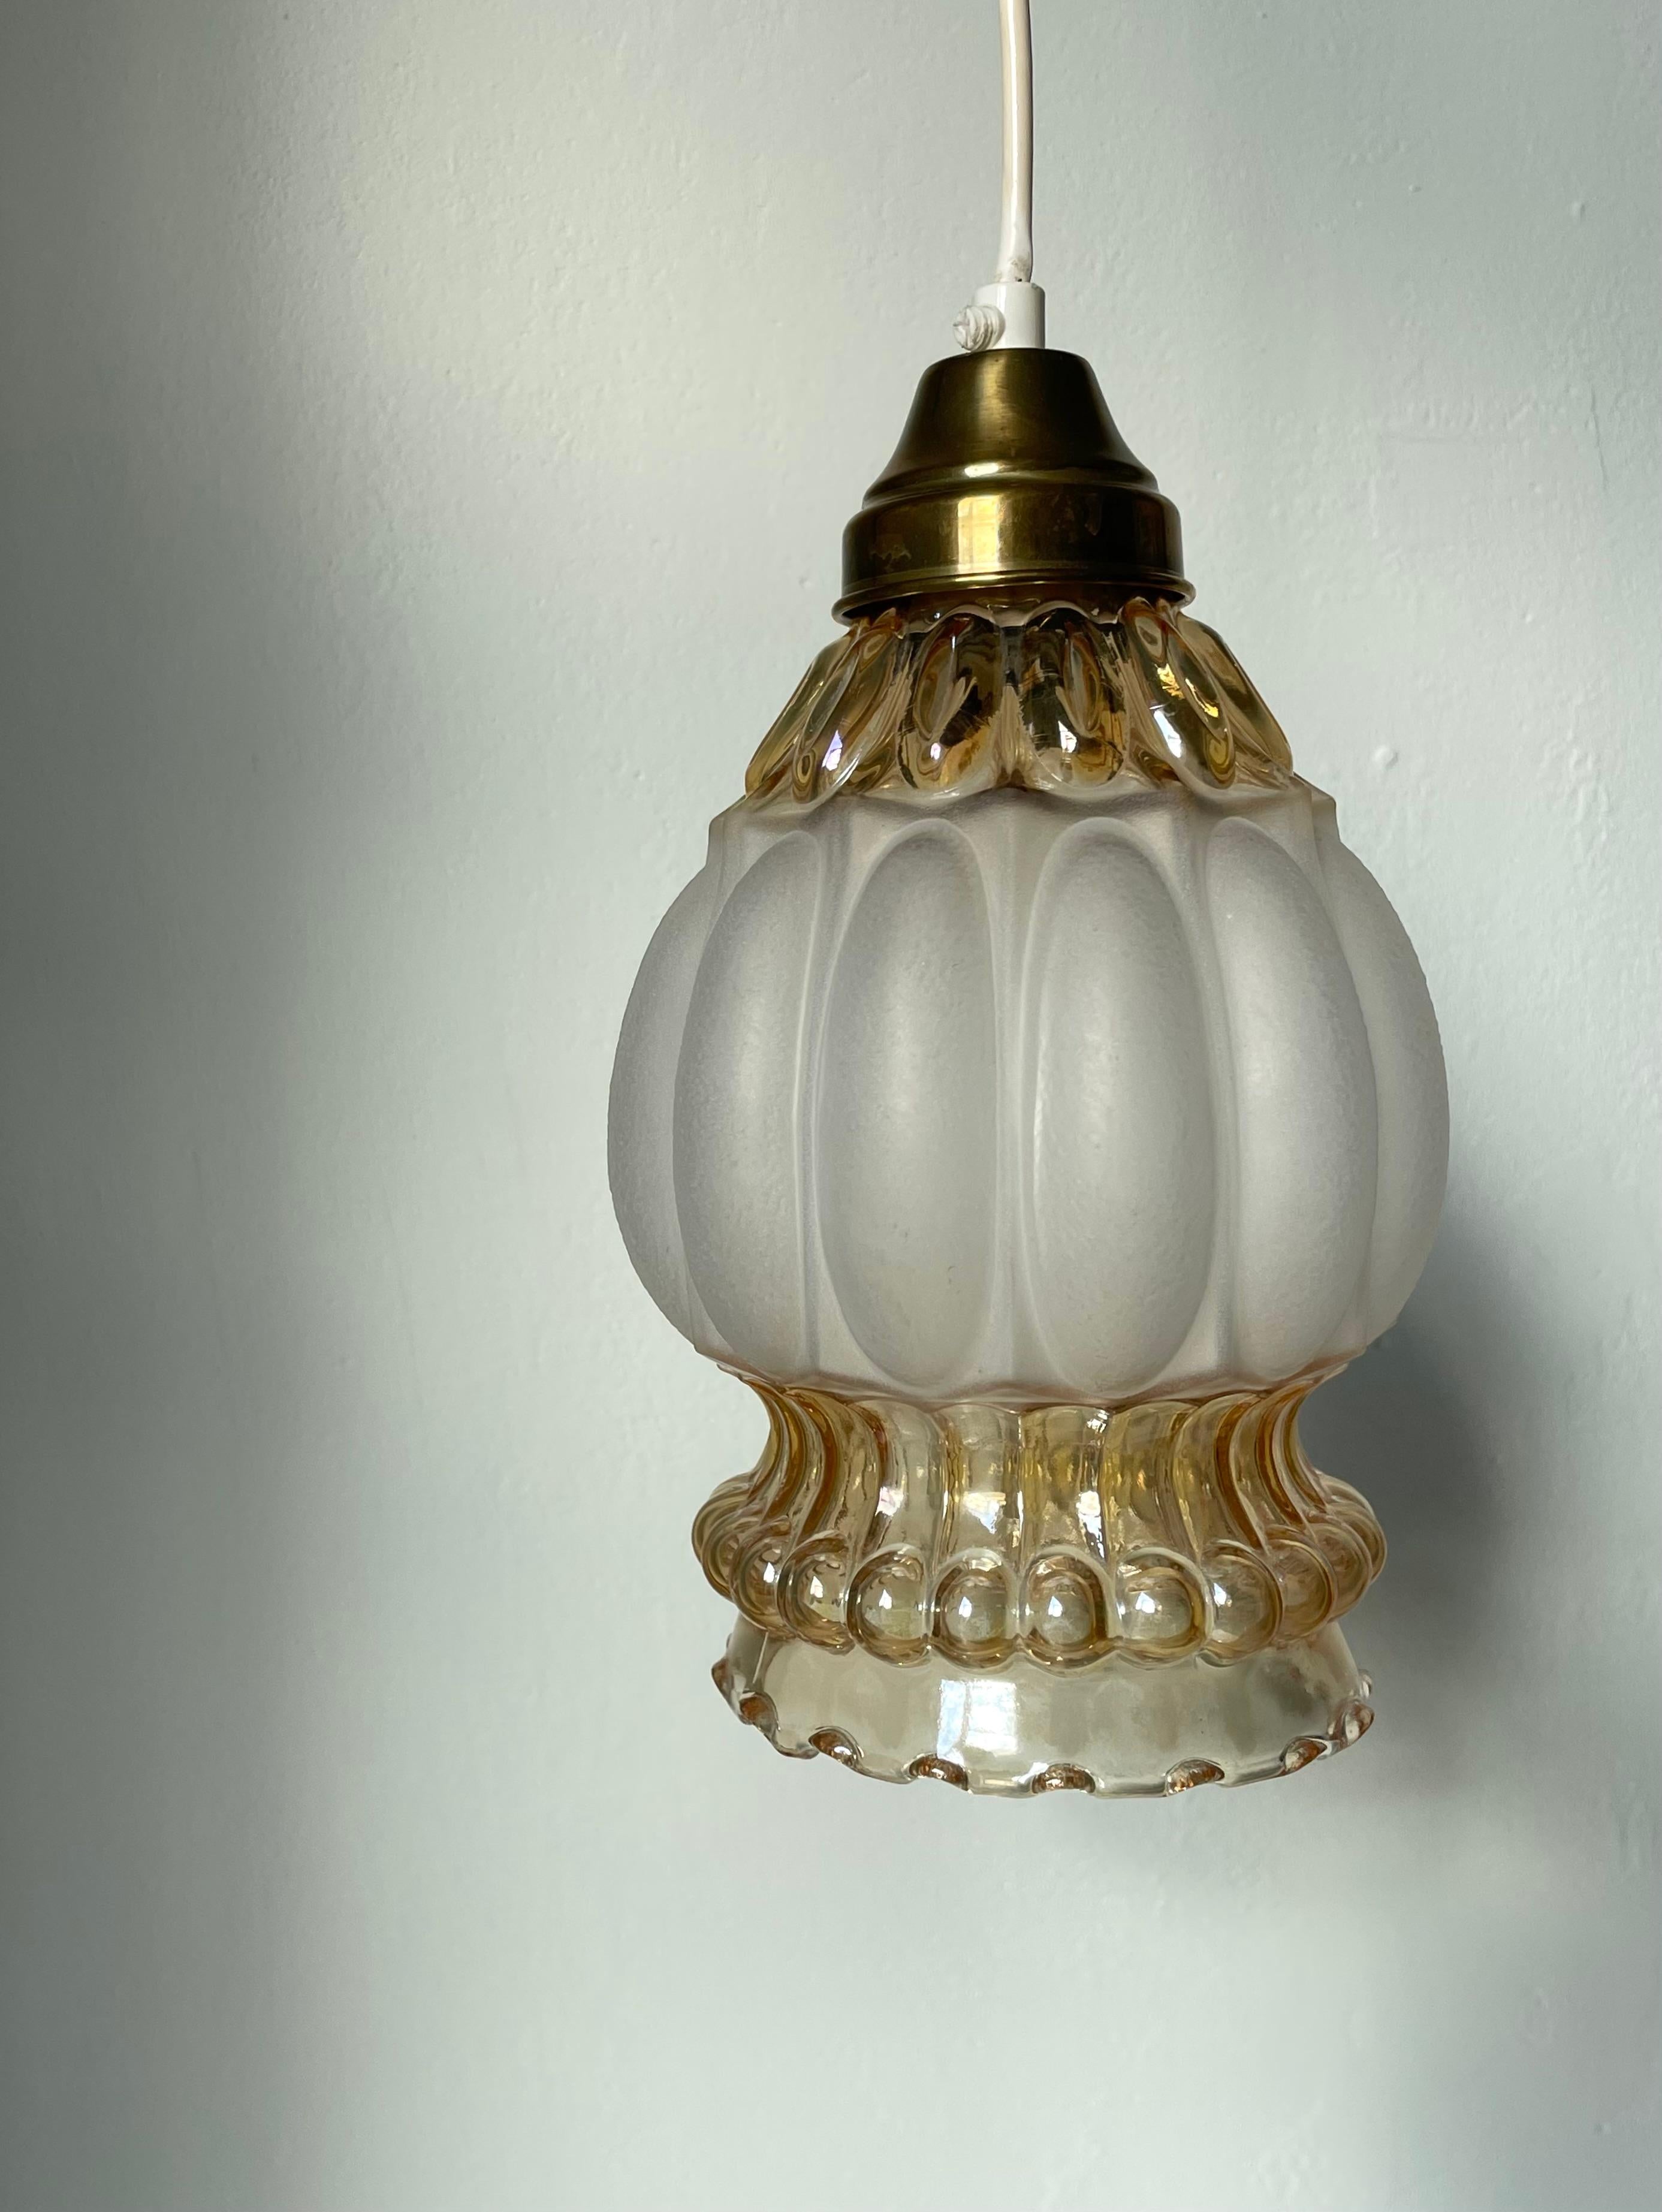 Antique French Art Nouveau ceiling light with bulging soft shaped white frosted glass, textured amber coloured art glass and brass top. Lots of textures making the light manifest itself from the different angles through the soft shaped glass parts.